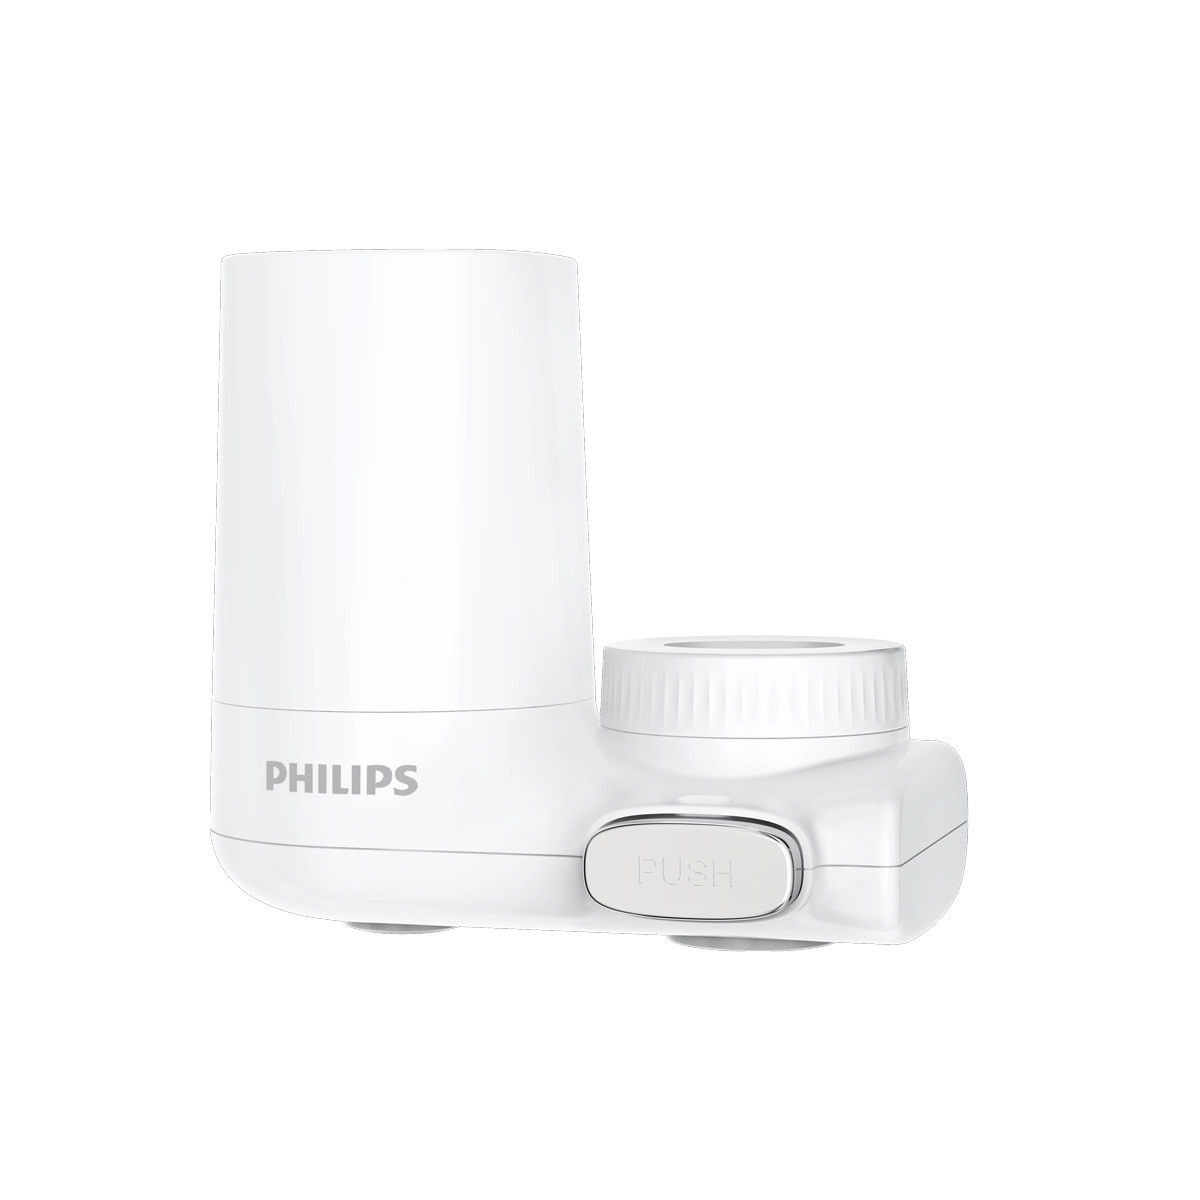 Philips On-tap 3-stage X-Guard Micro Filtration - White - AWP3703WH -  Powermove Distribution Pty Ltd